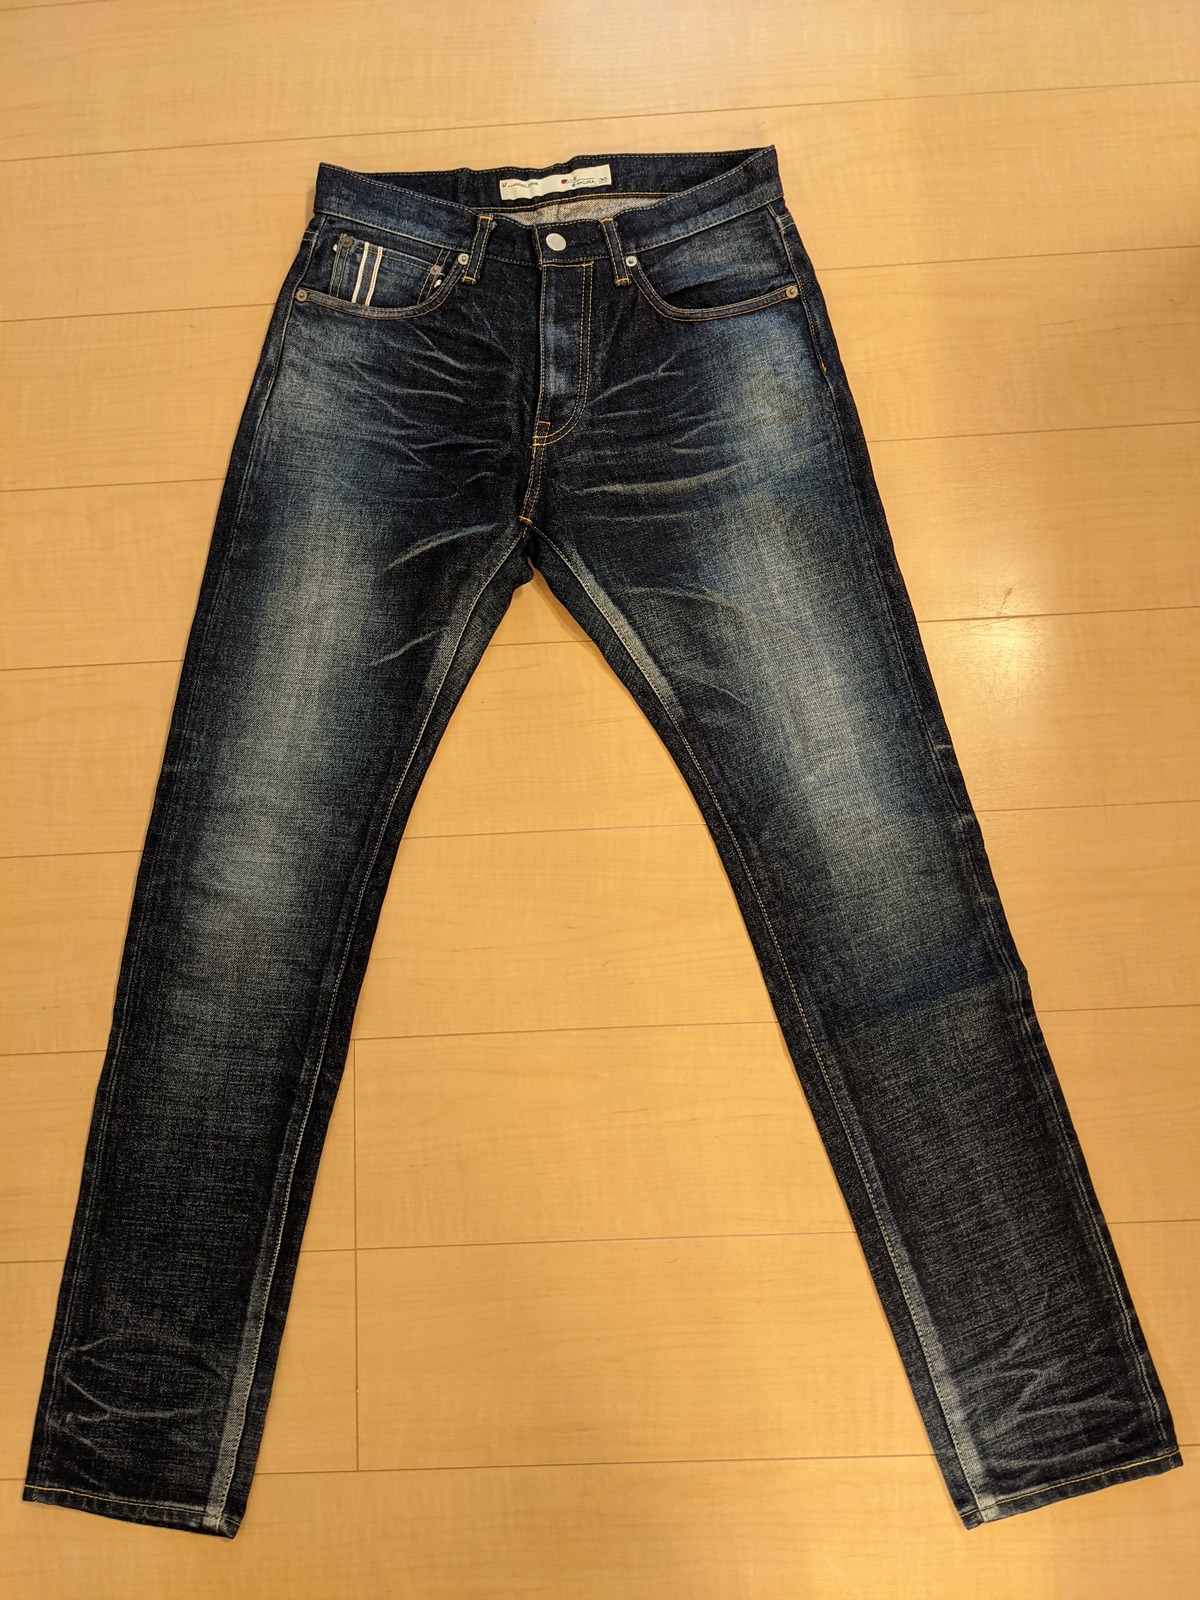 BLUE SAKURA Jeans 30inch 15oz Selvedge Jeans Used only once ブルーサクラジーンズ⑦ |  japanese culture trade